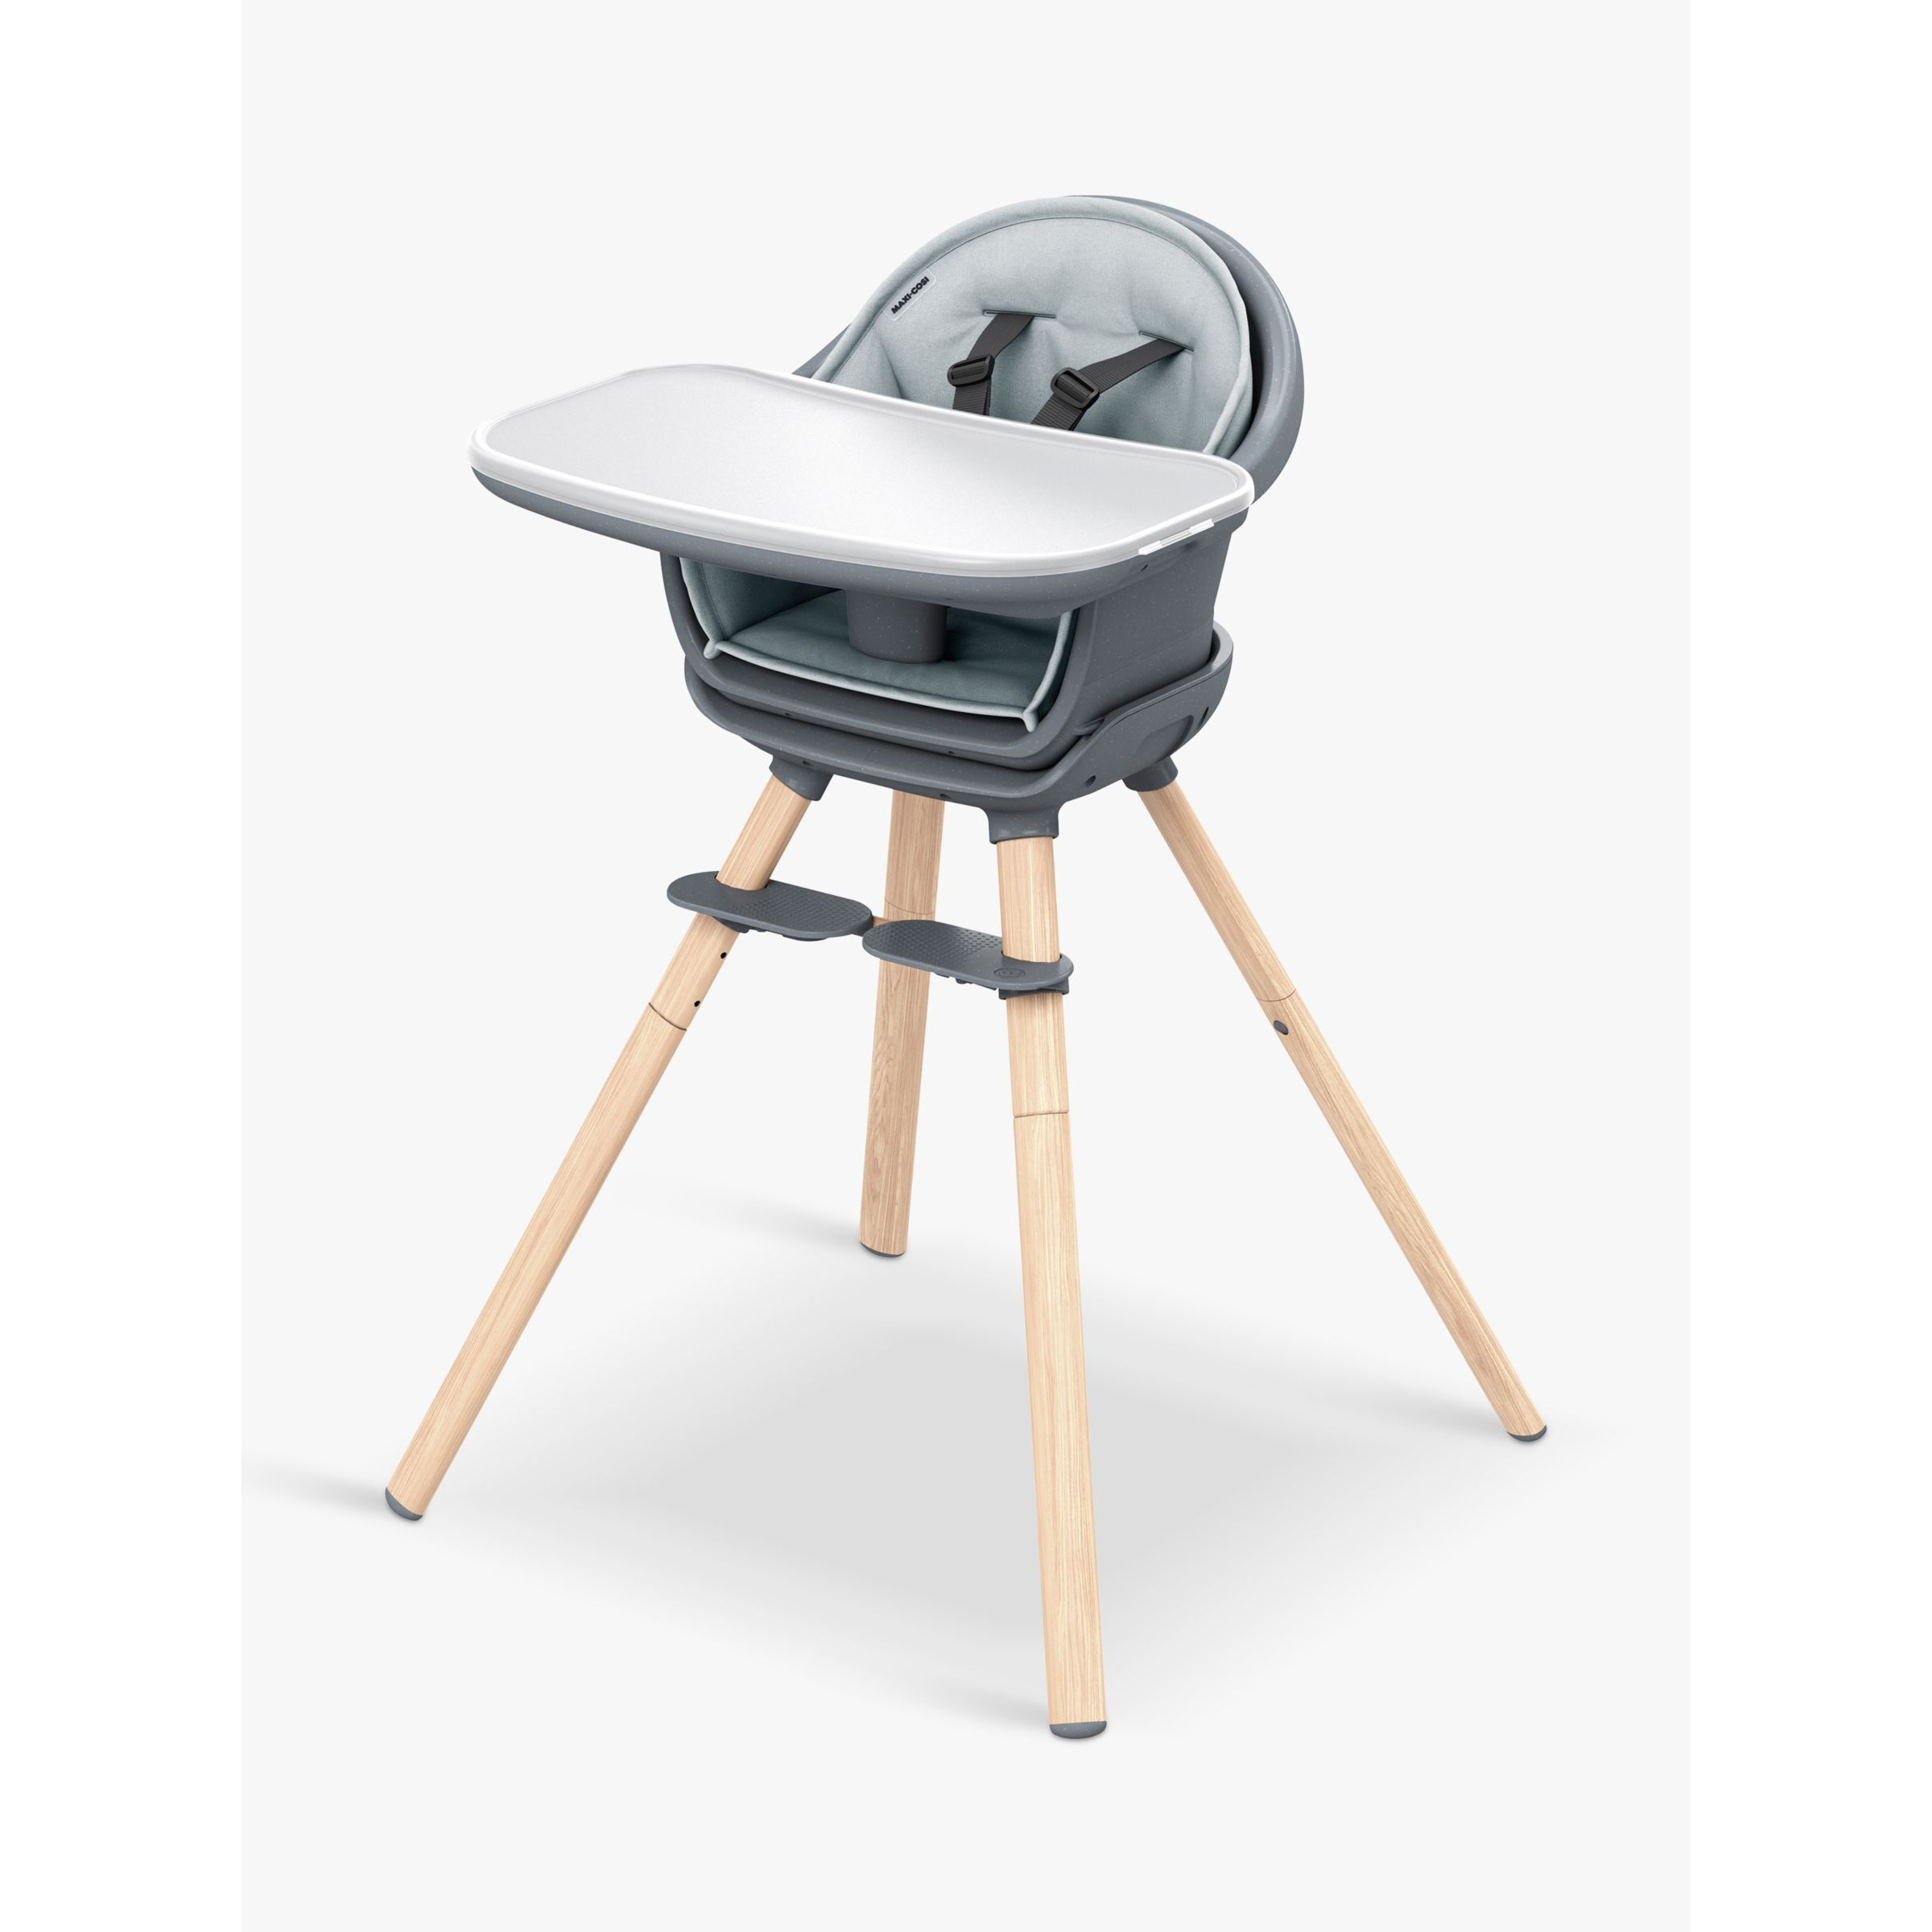 Maxi-Cosi Moa 8-in-1 Highchair, Graphite